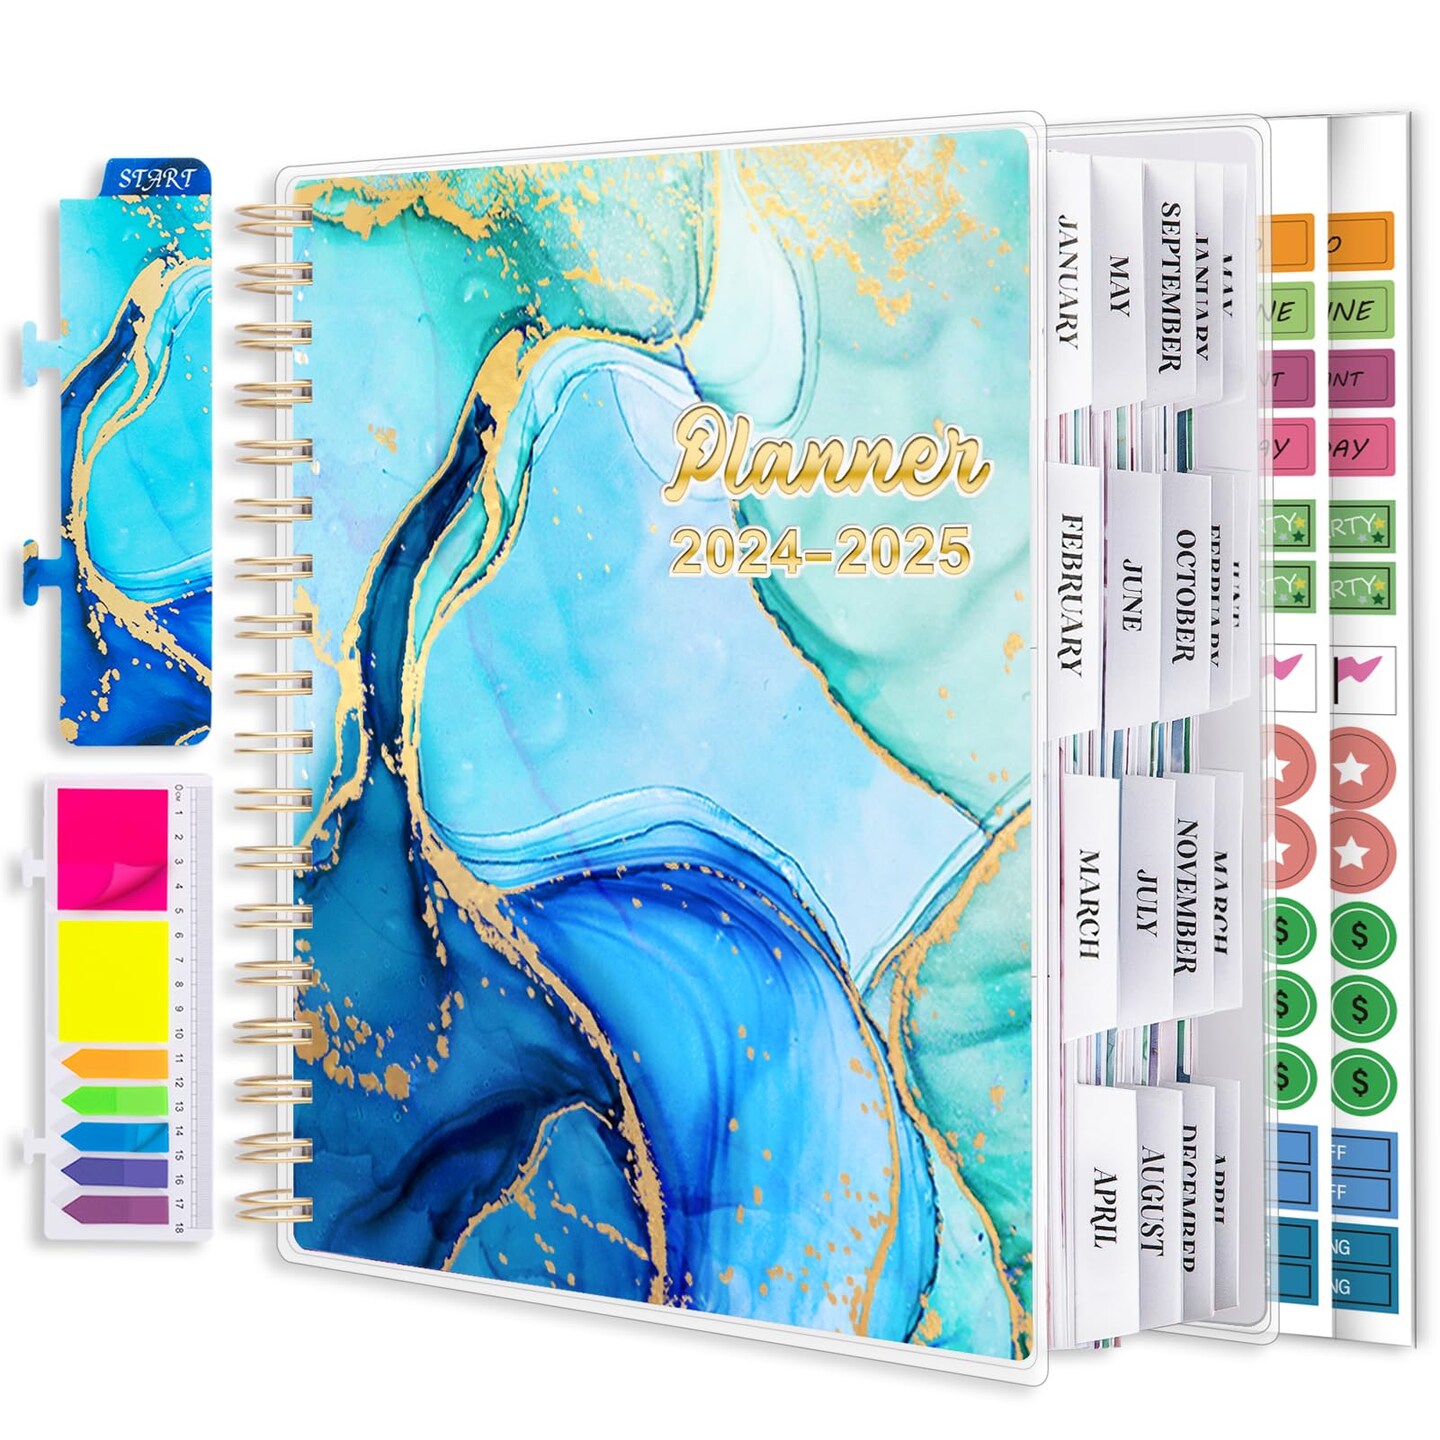 2024 Large Weekly Planner | A4 Size